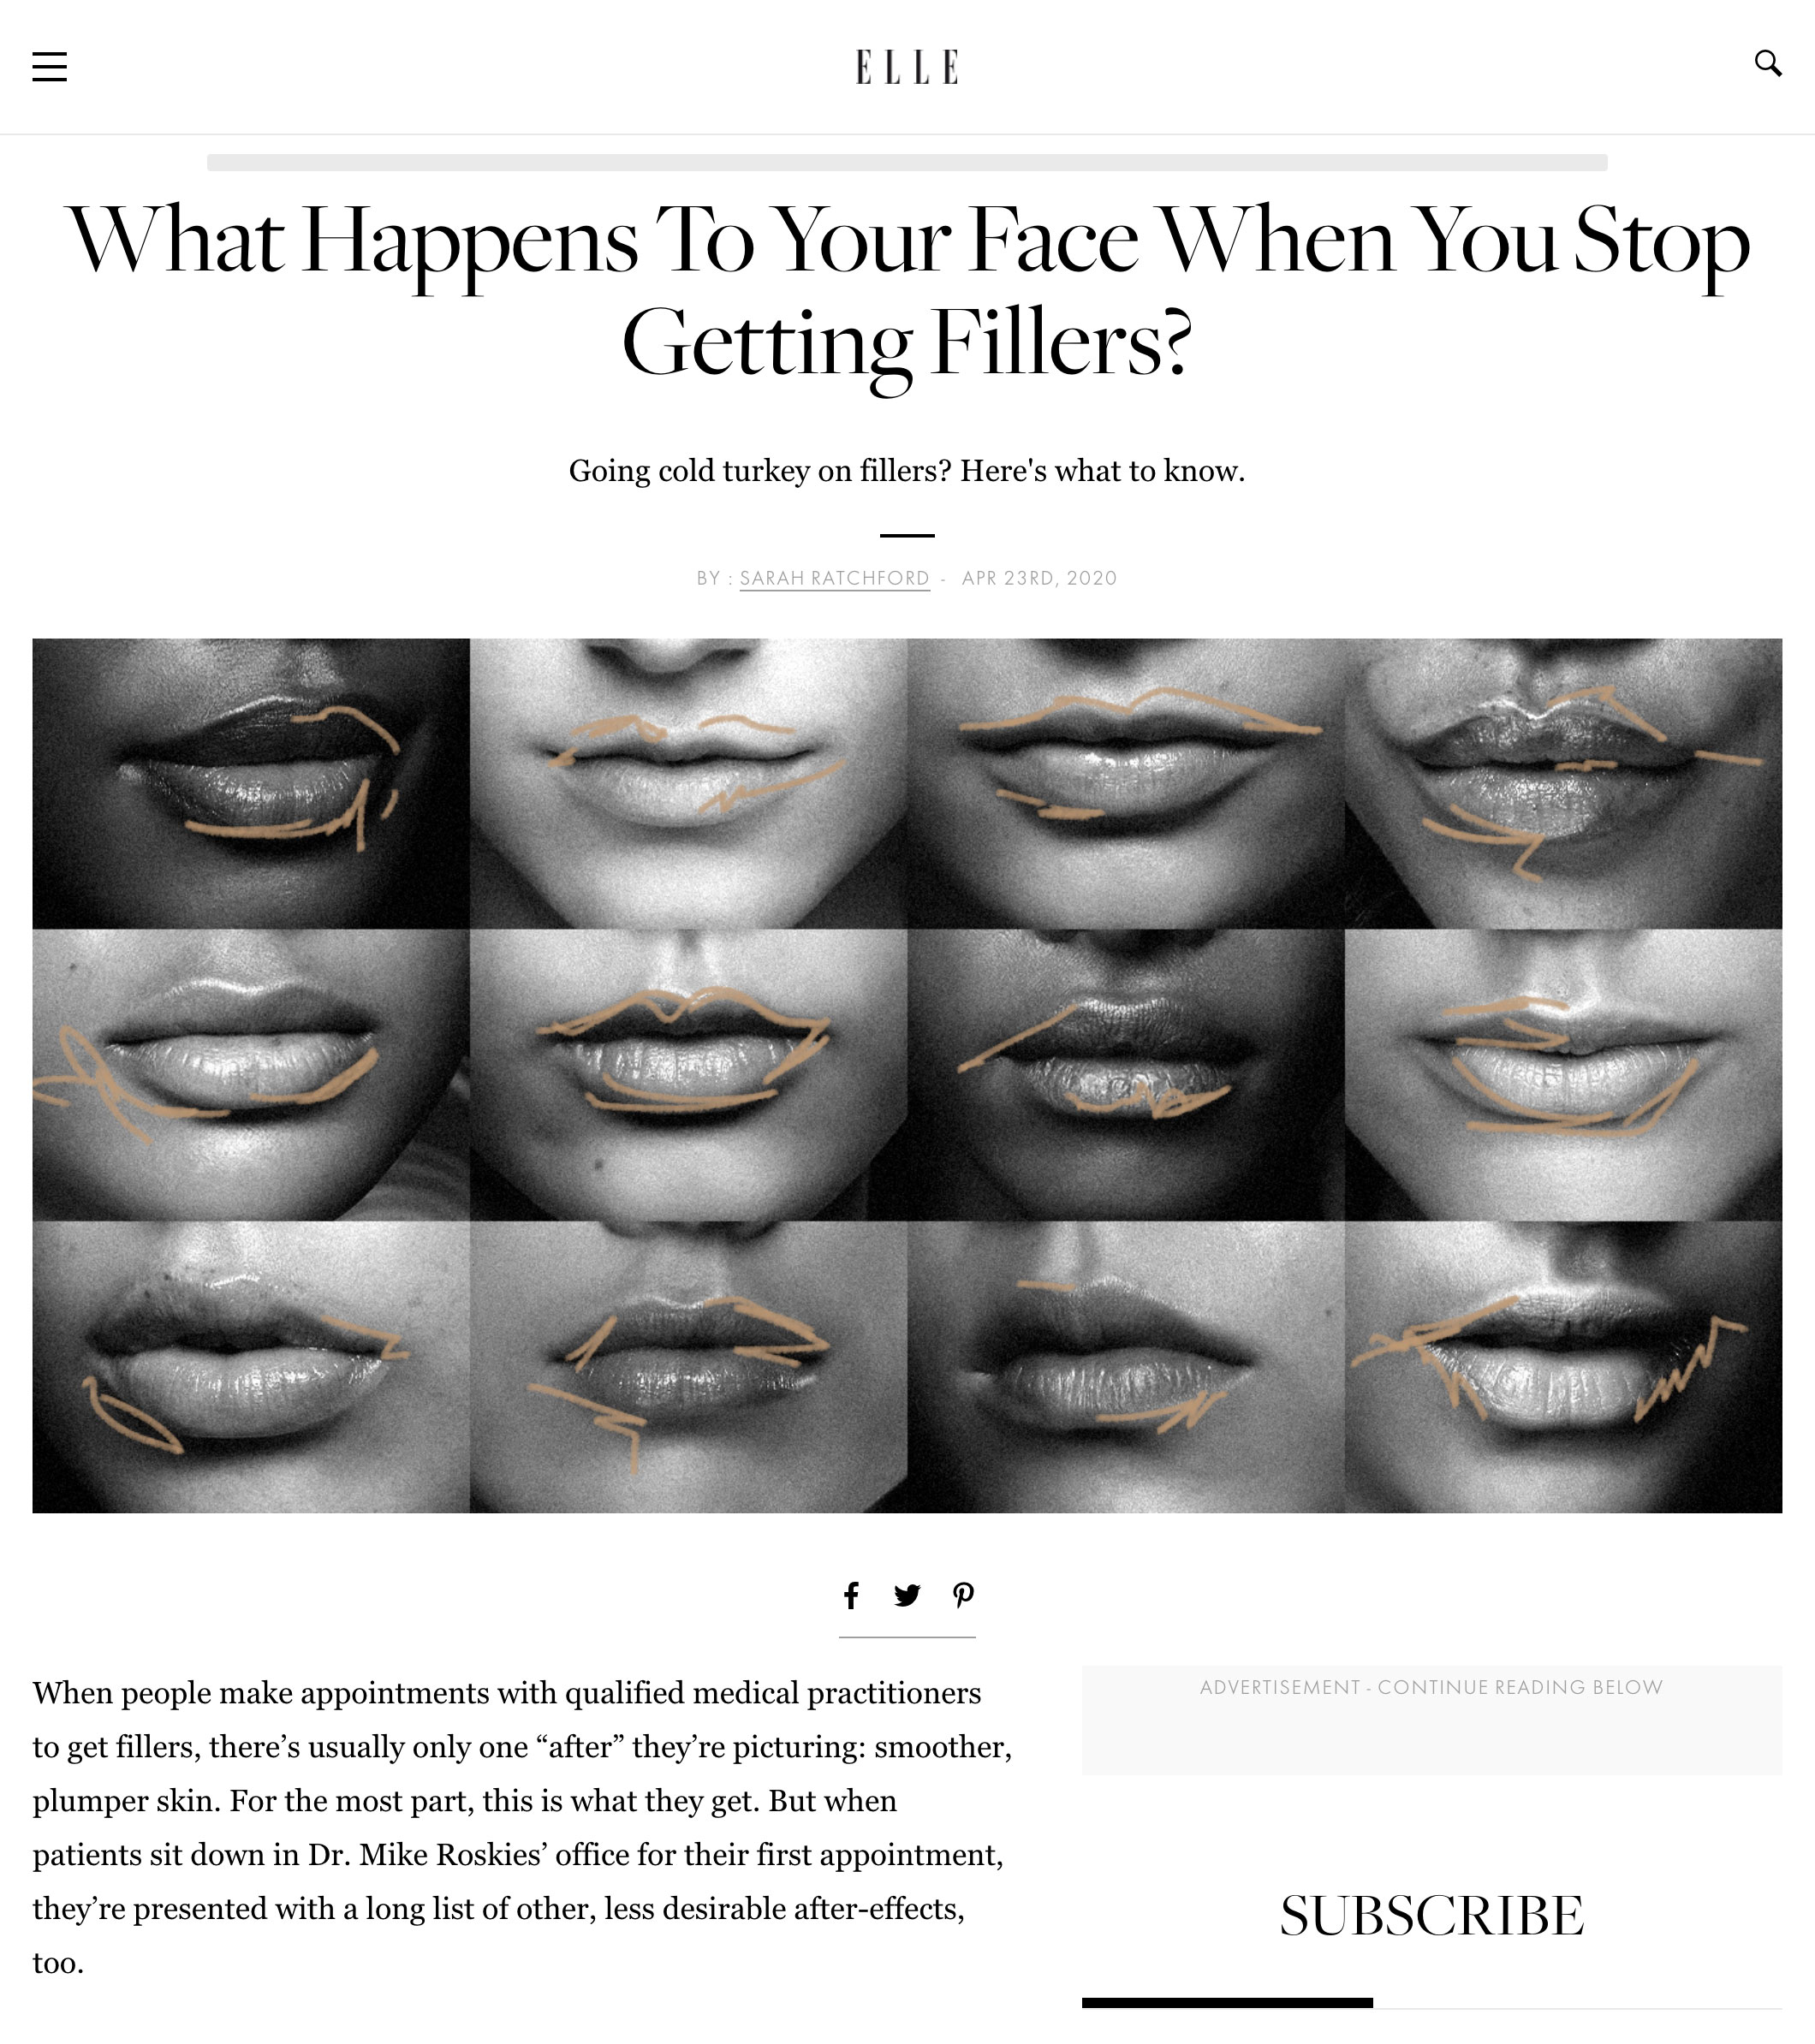 What happens to your face when you stop getting fillers blog